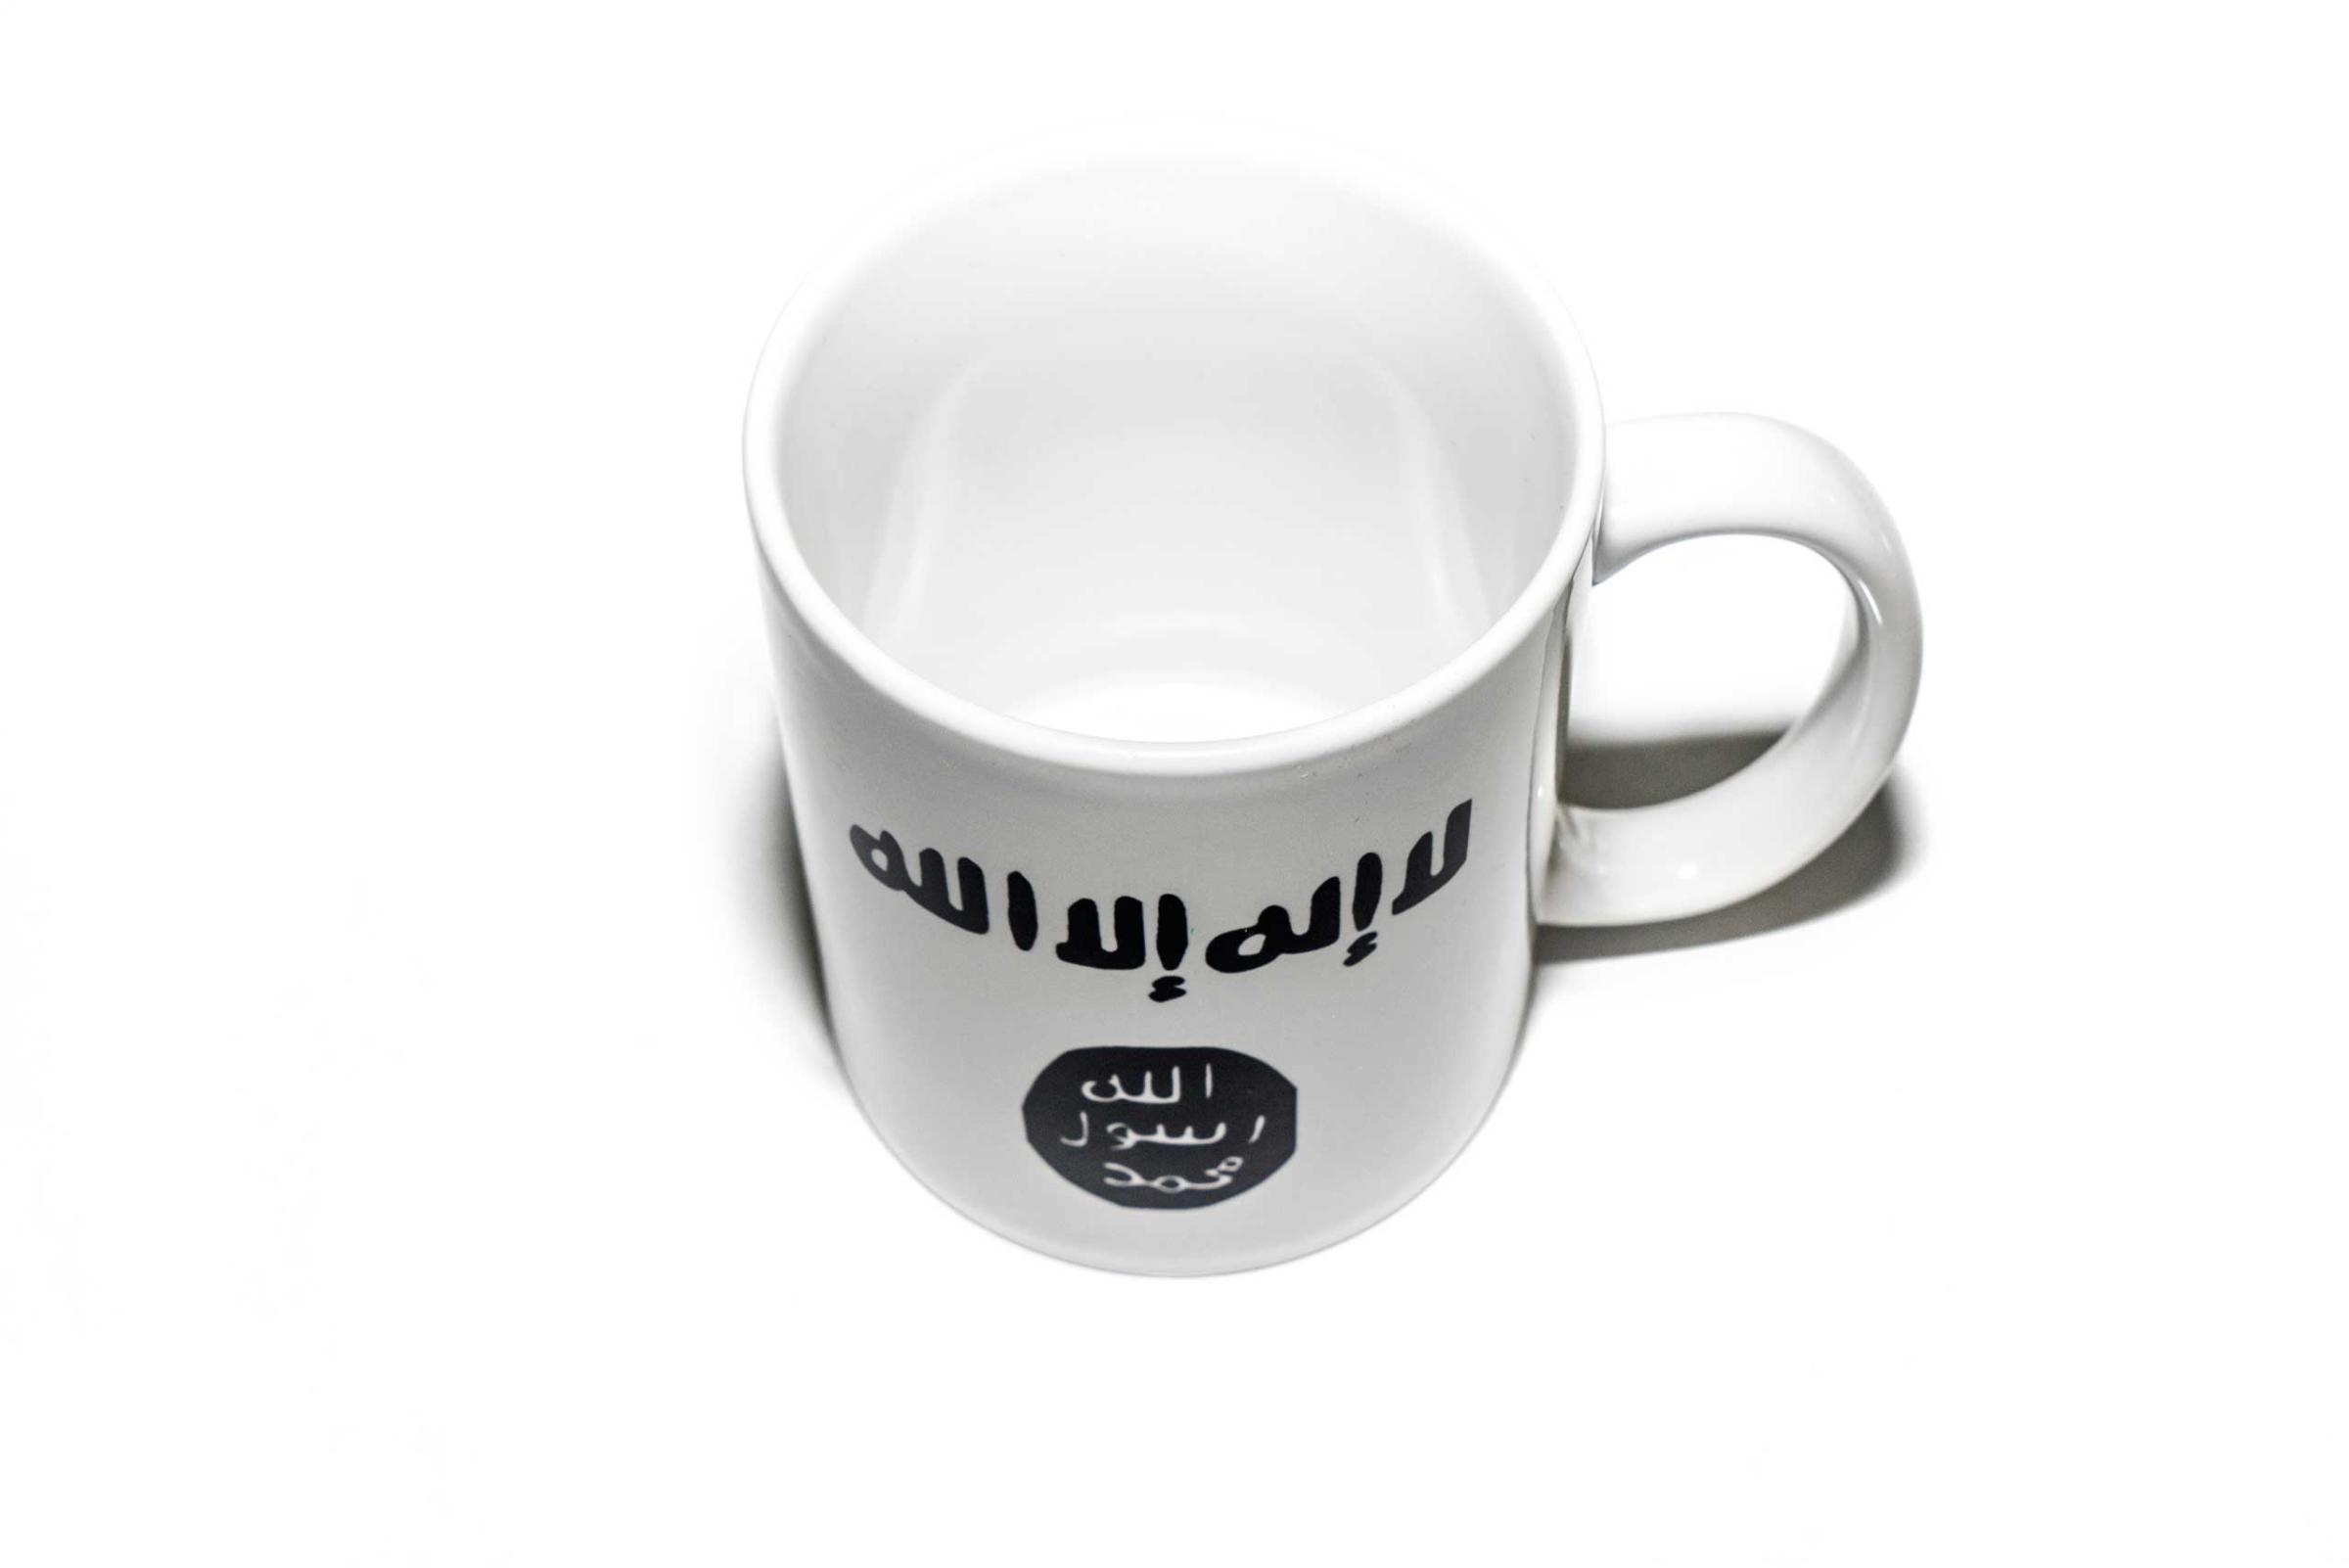 Items of clothing and objects found in a Islamic clothing and accessory shop in the Bagicilar district of Istanbul. A western style tea mug with the icopnography of Islamic State on the side.